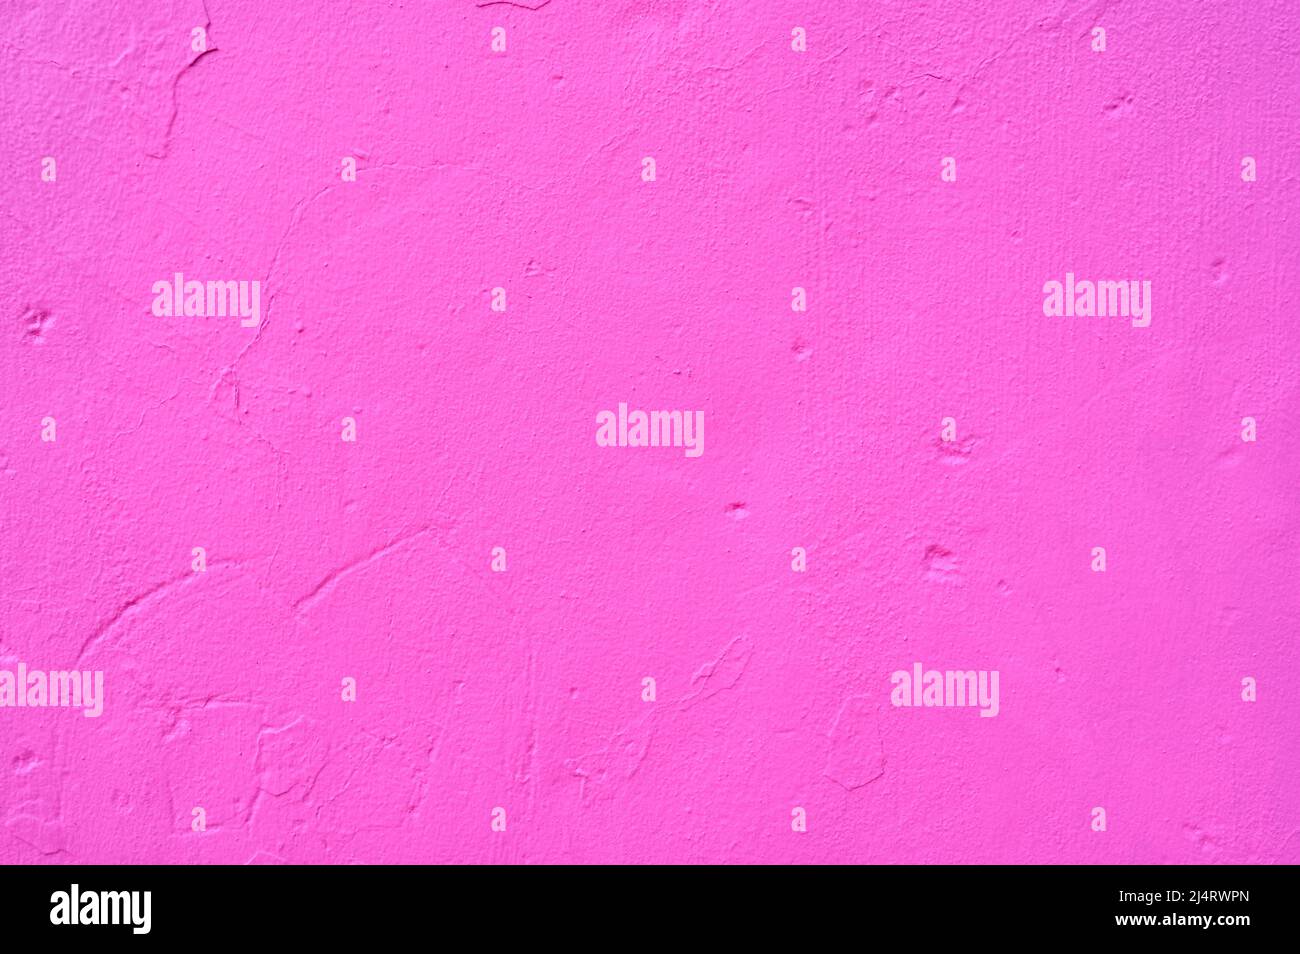 detail of an irregular stucco wall painted pink or fusia Stock Photo